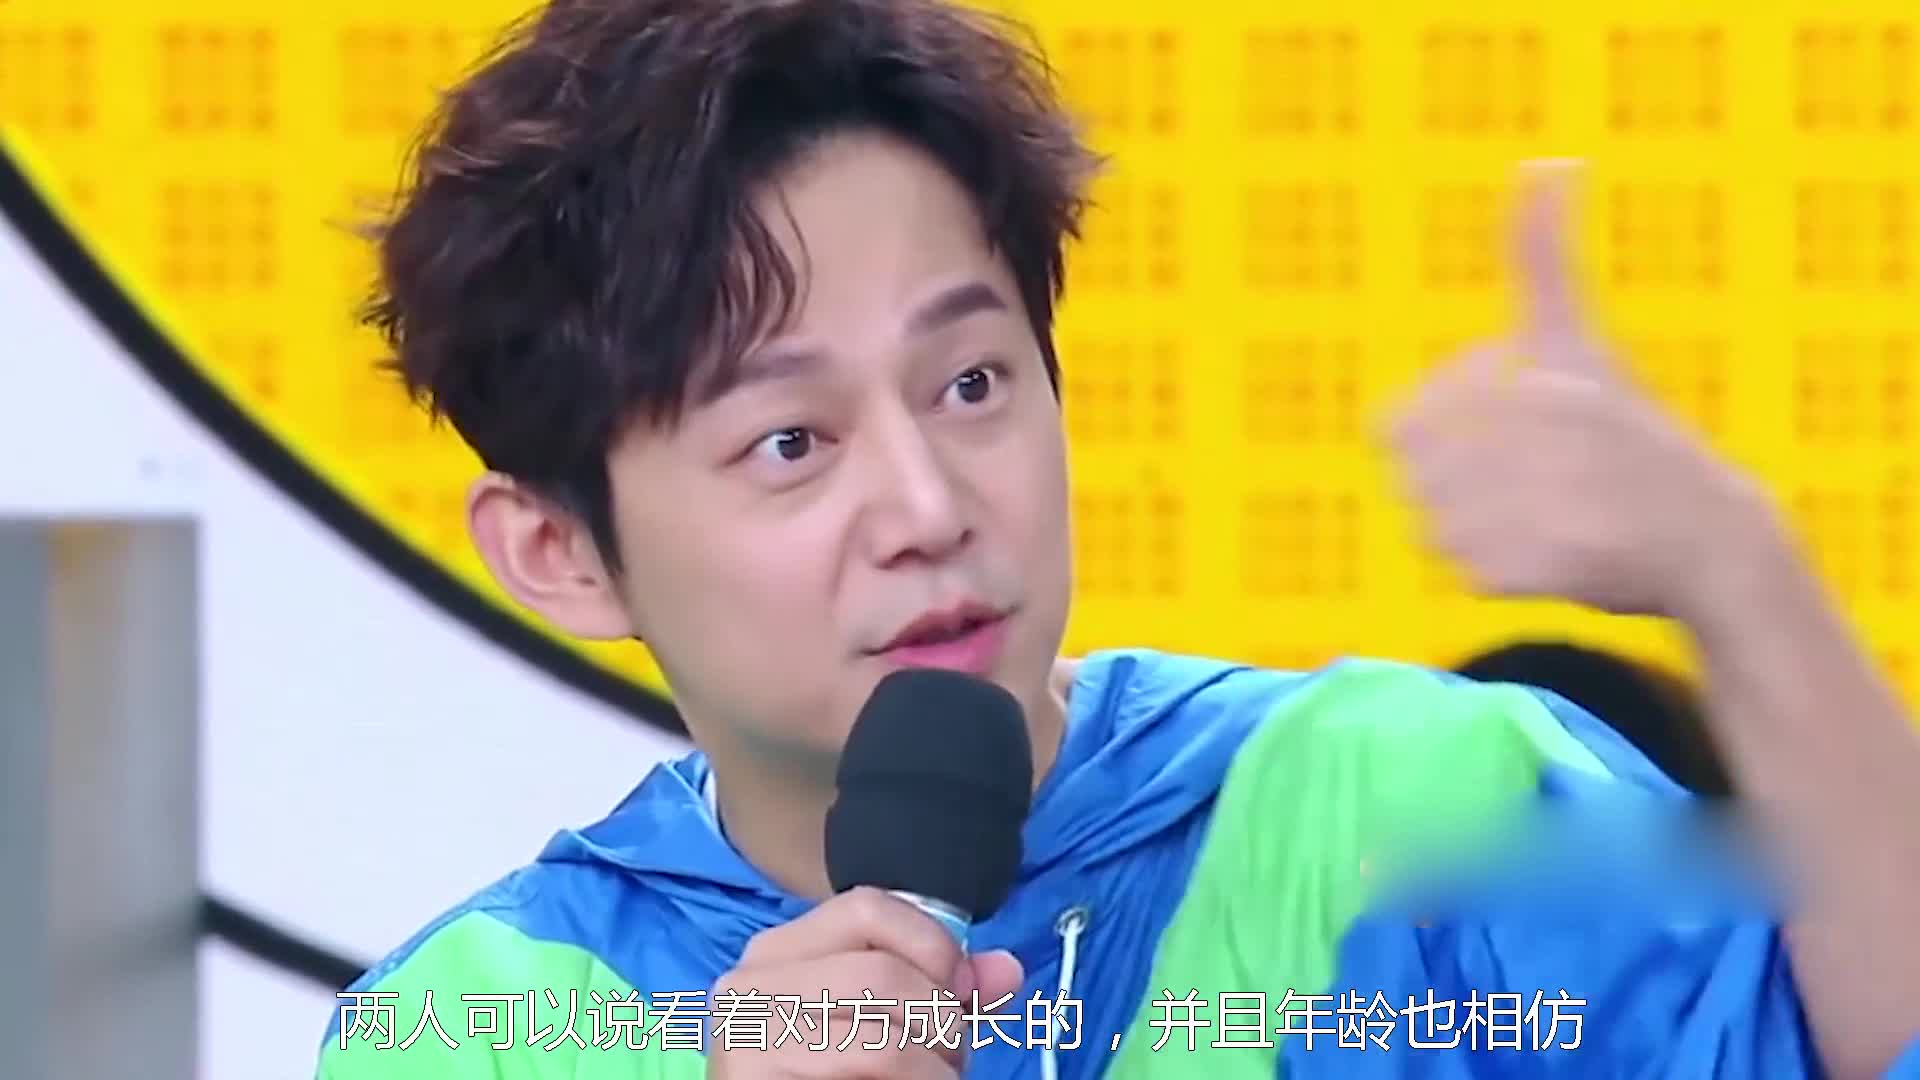 Wang Han was asked: Who are you and He Jing in charge? His answer is that self-restraint can't be pretended.